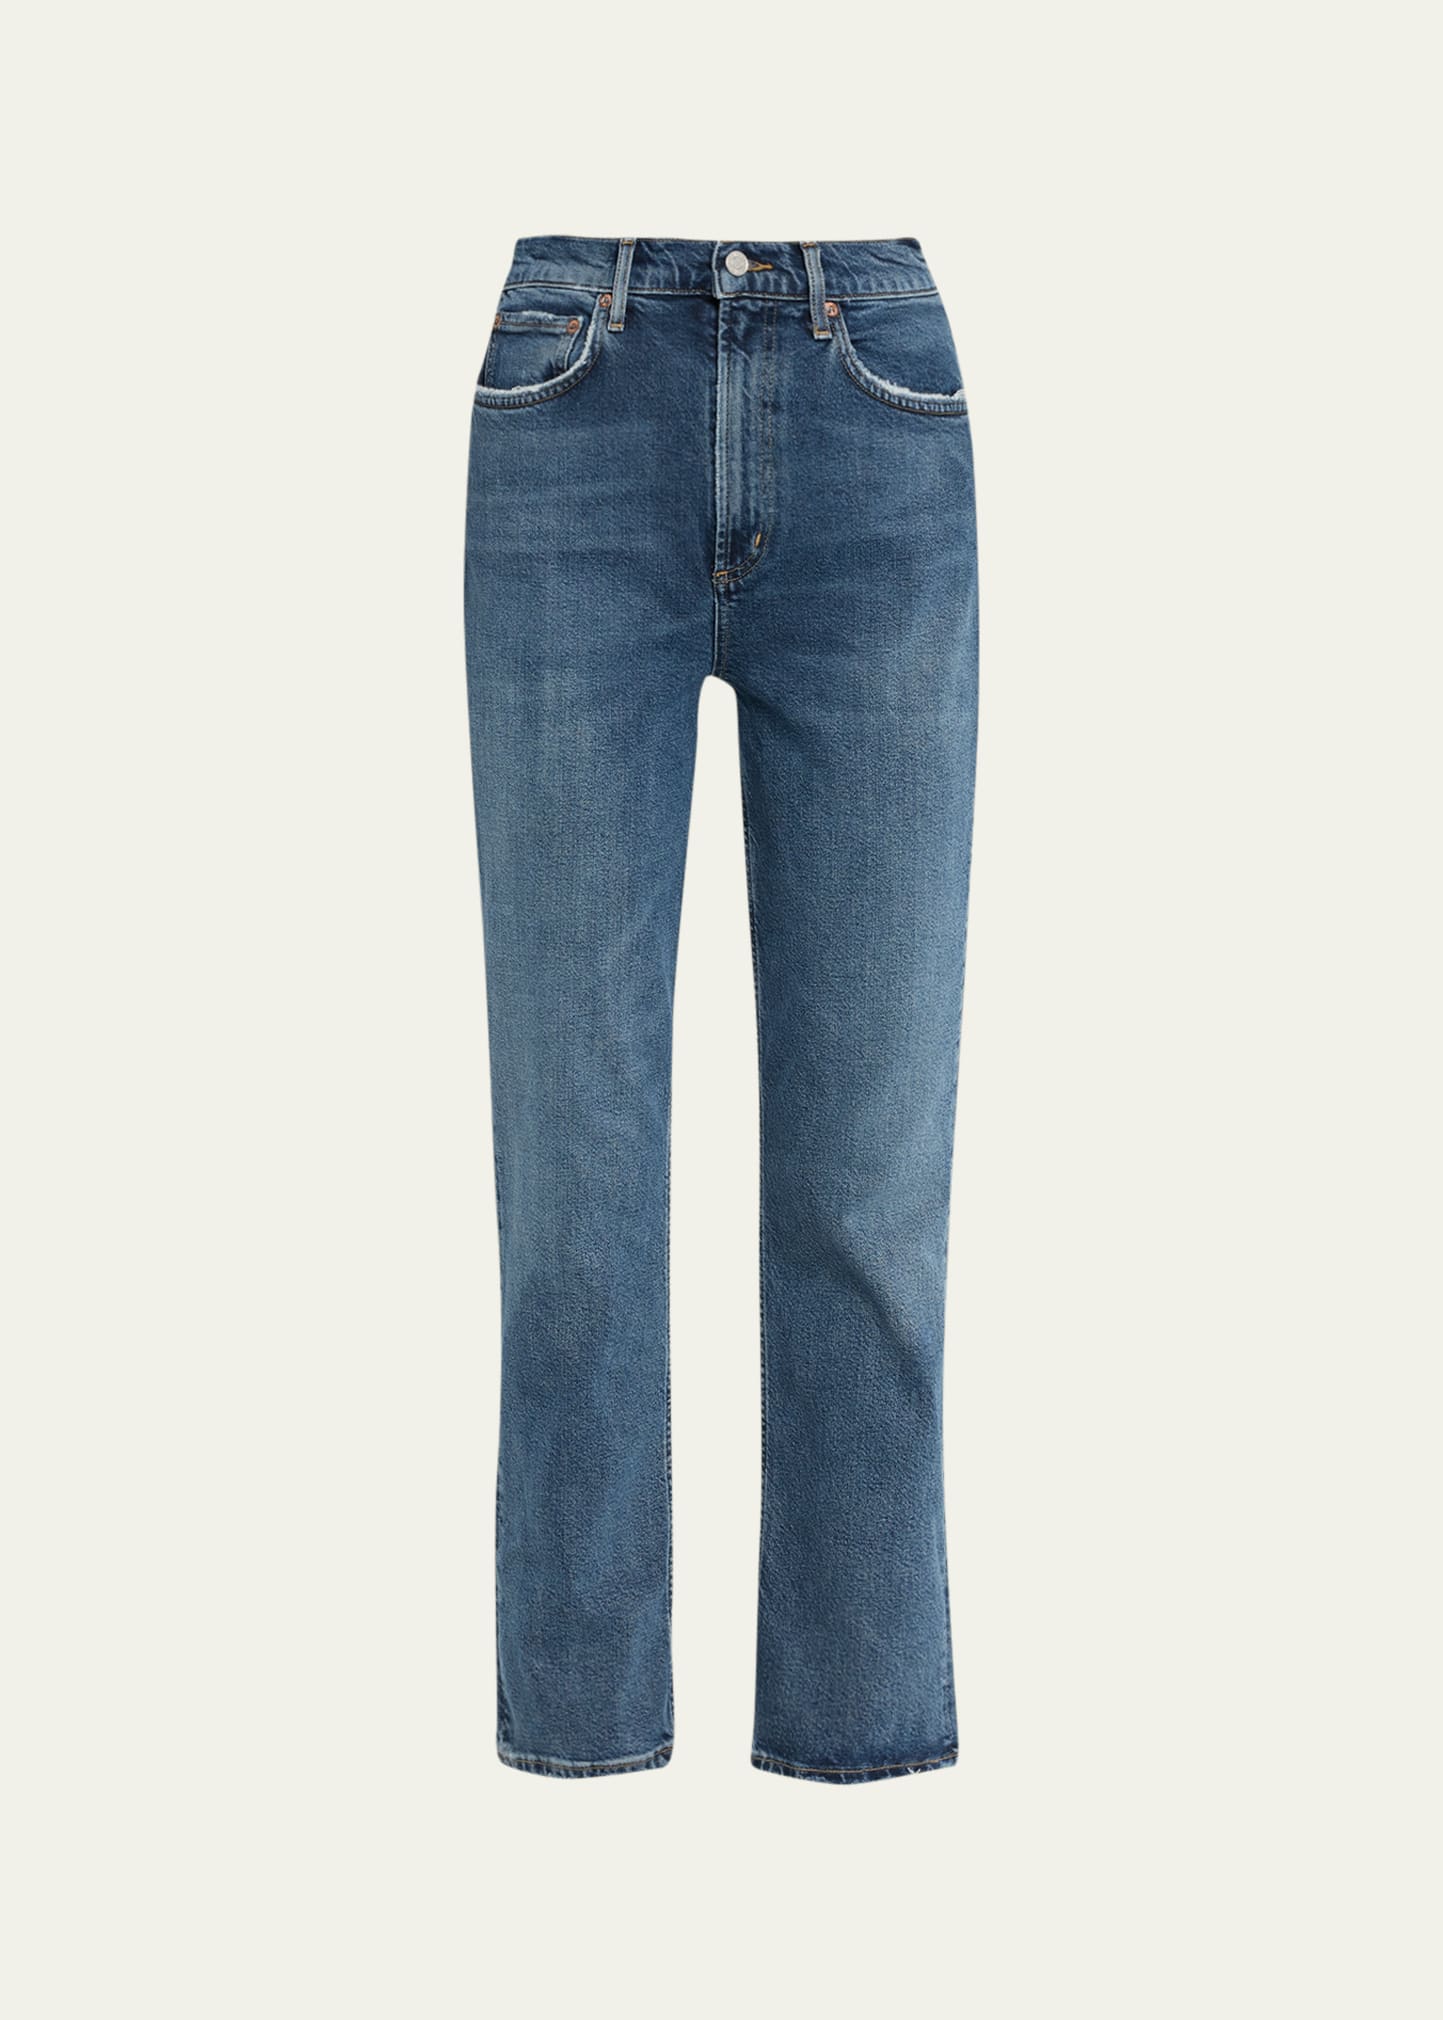 AGOLDE High Rise Stovepipe Jeans | Bergdorf Goodman